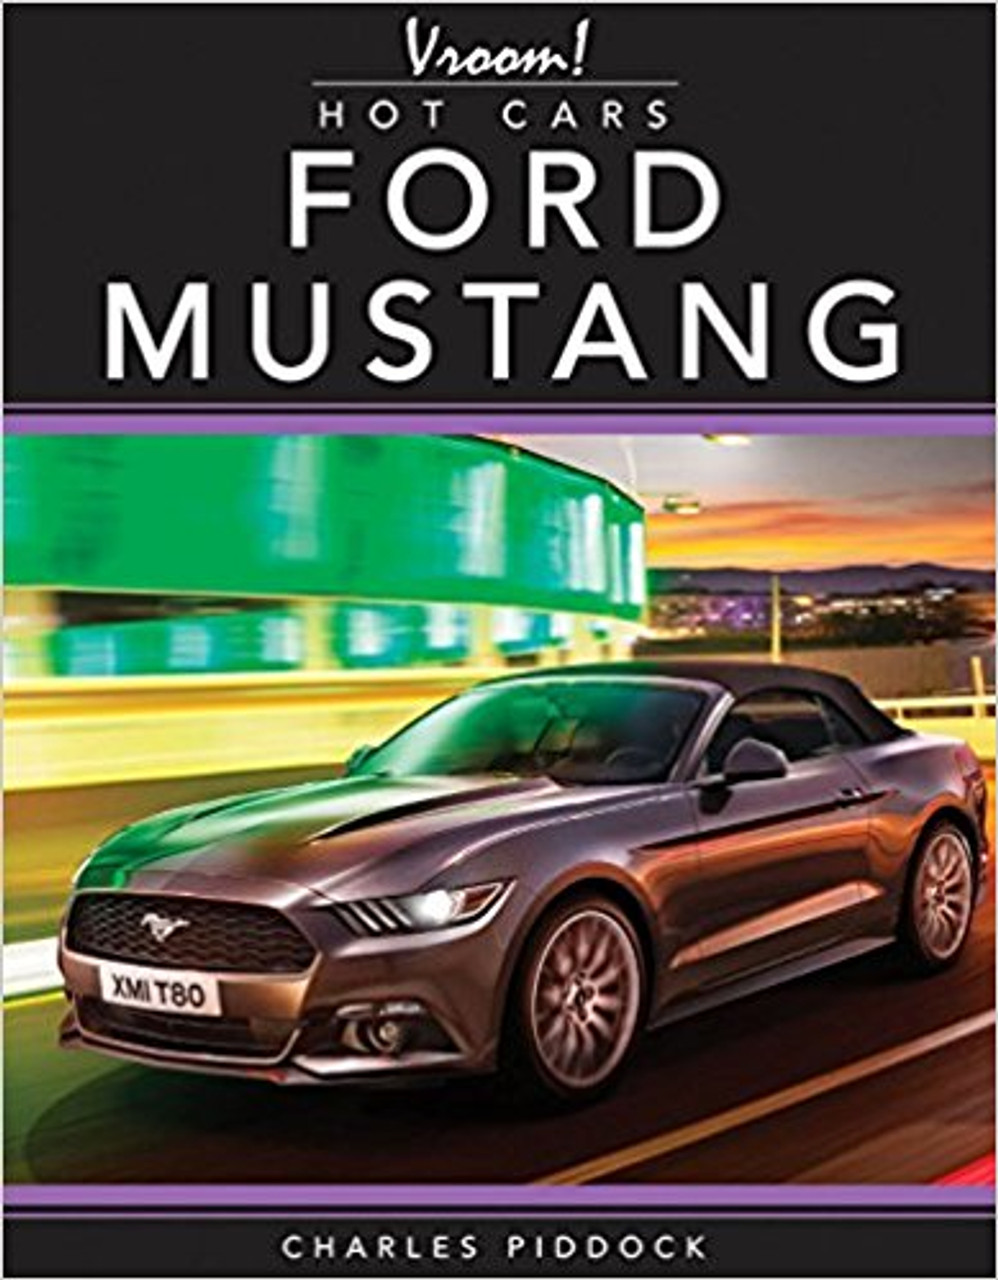 Buckle up and get ready to discover the fascinating story of the Ford Mustang, one of the world's most famous vehicles. The Mustang is a muscle car so cool, it's inspired hundreds of movies and songs since it was first released in 1964.